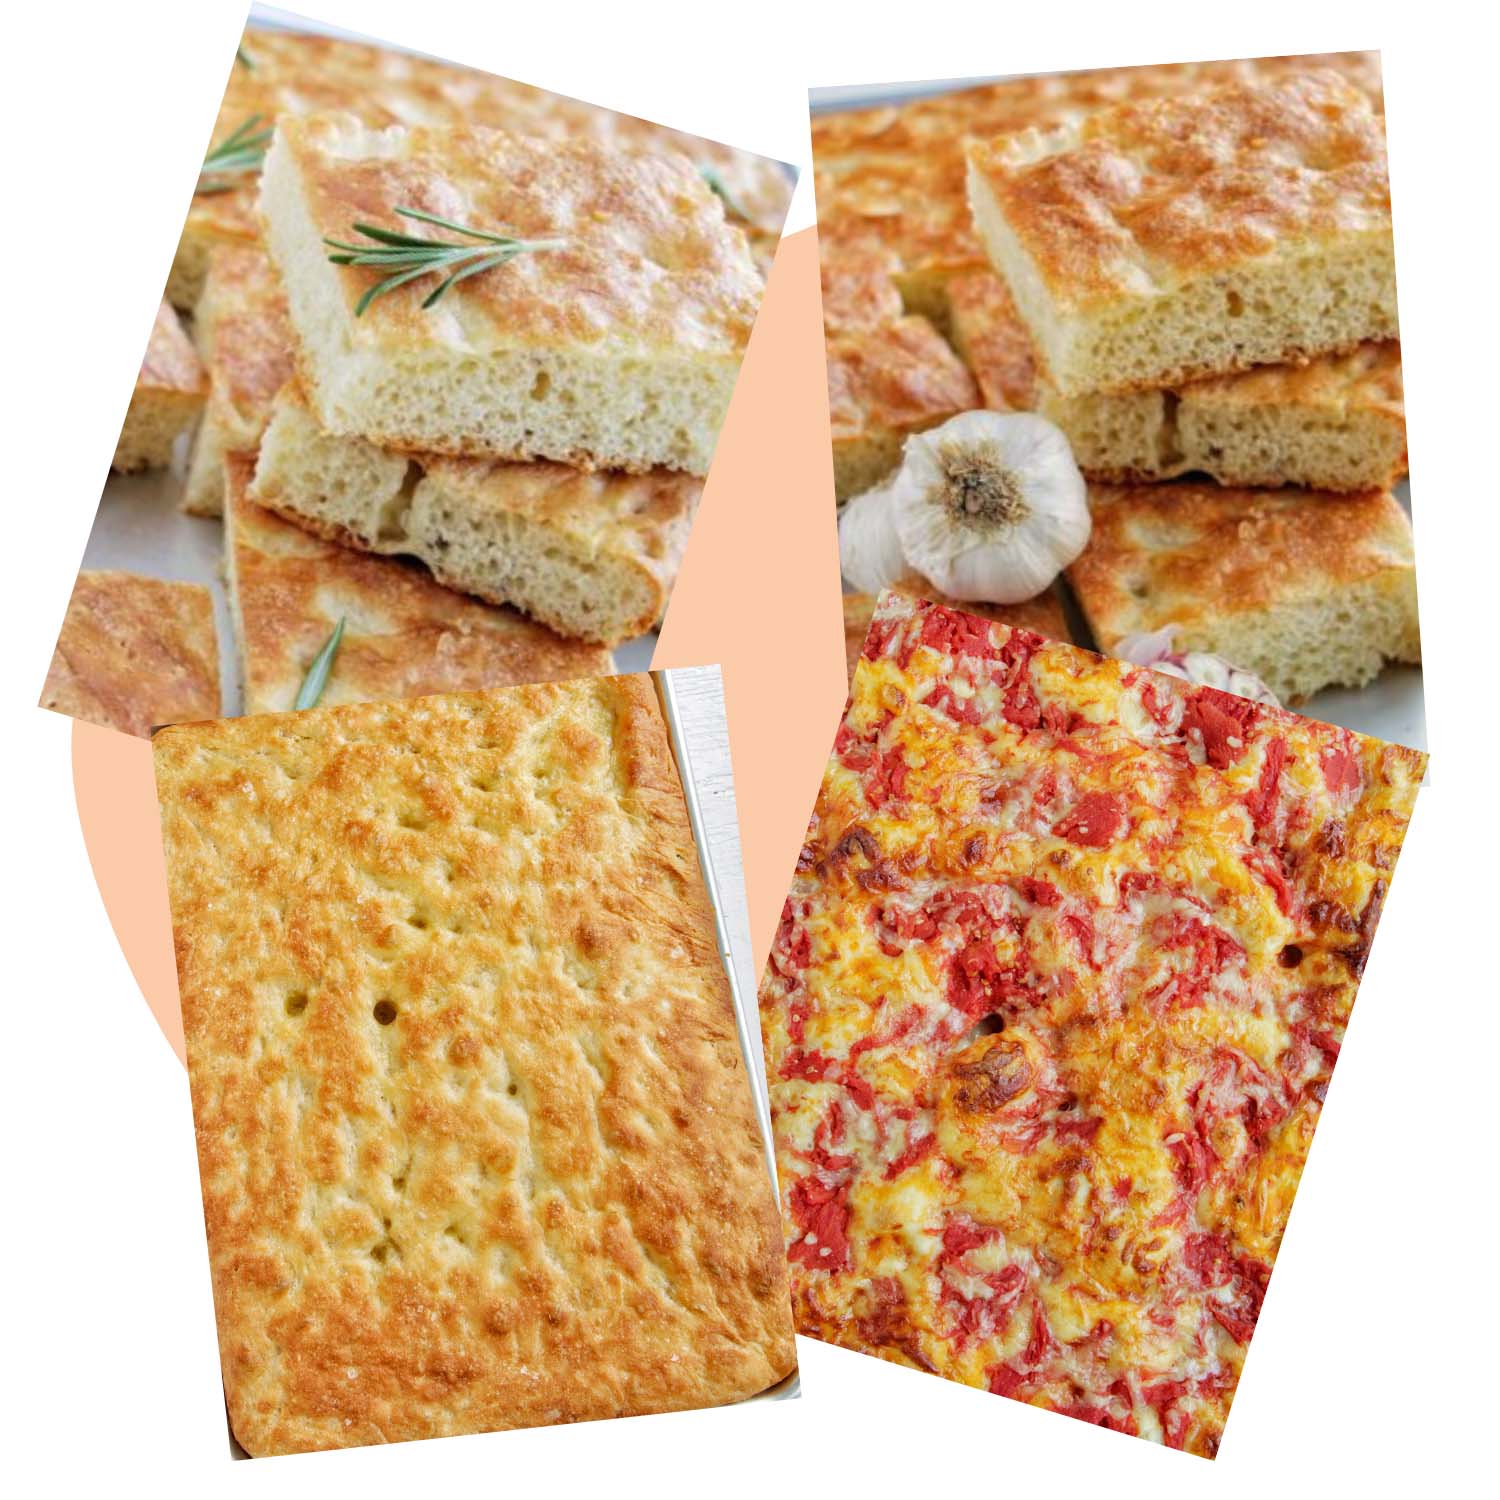 Various pictures of types of focaccia bread.